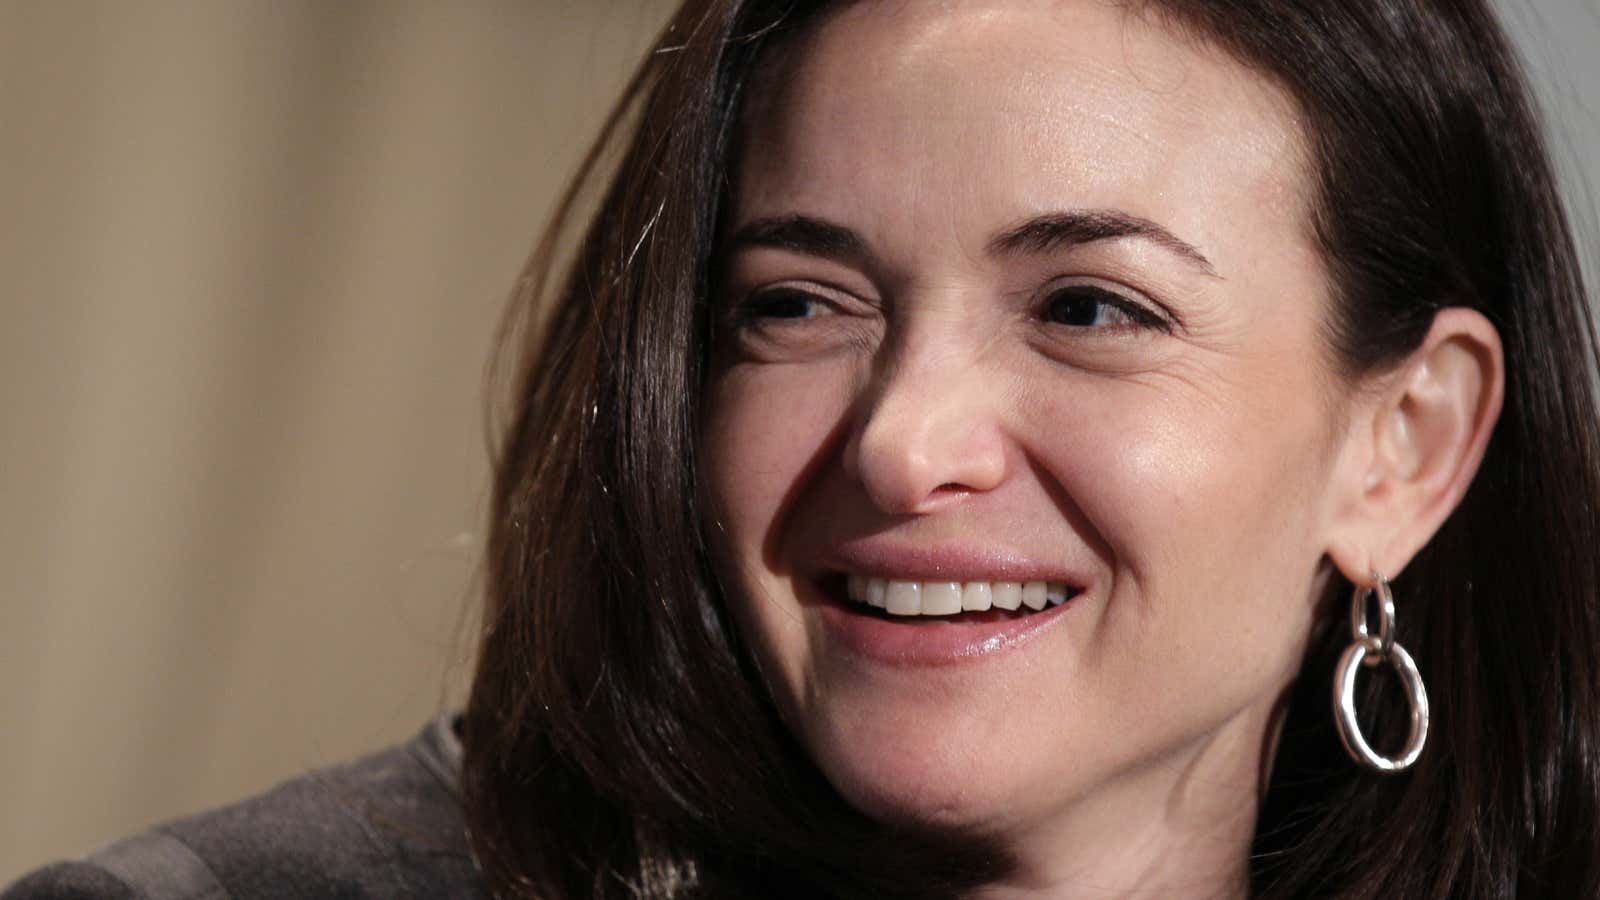 “It is the greatest irony of my life that losing my husband helped me find deeper gratitude,” Sandberg said.